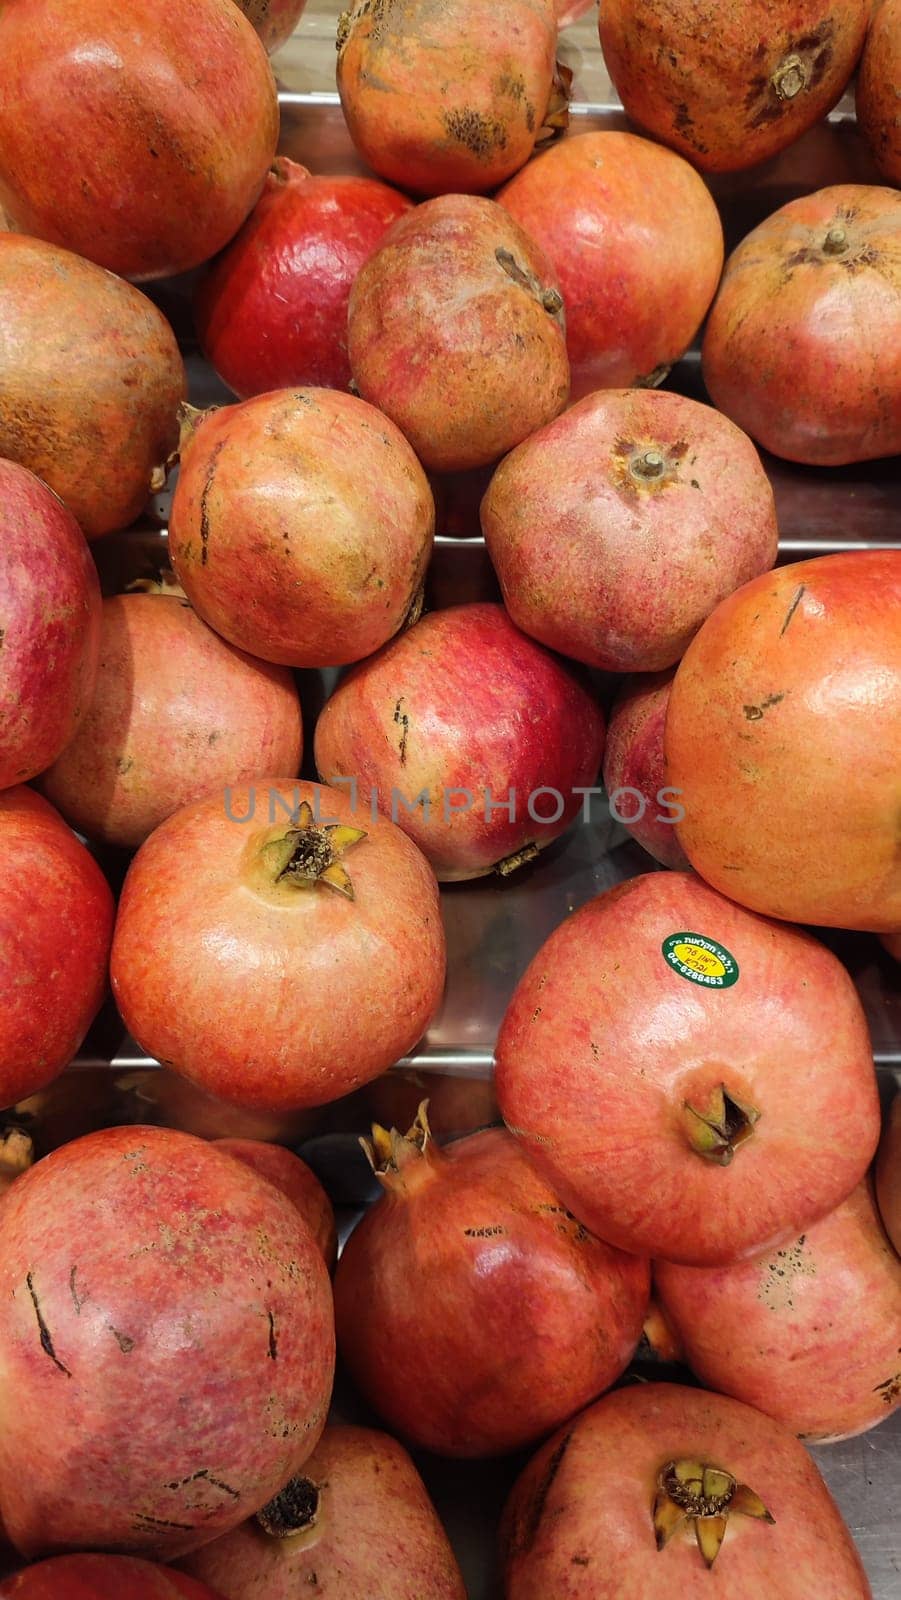 red pomegranate fruit, food background, shop, on sale, grocery store, market High quality photo